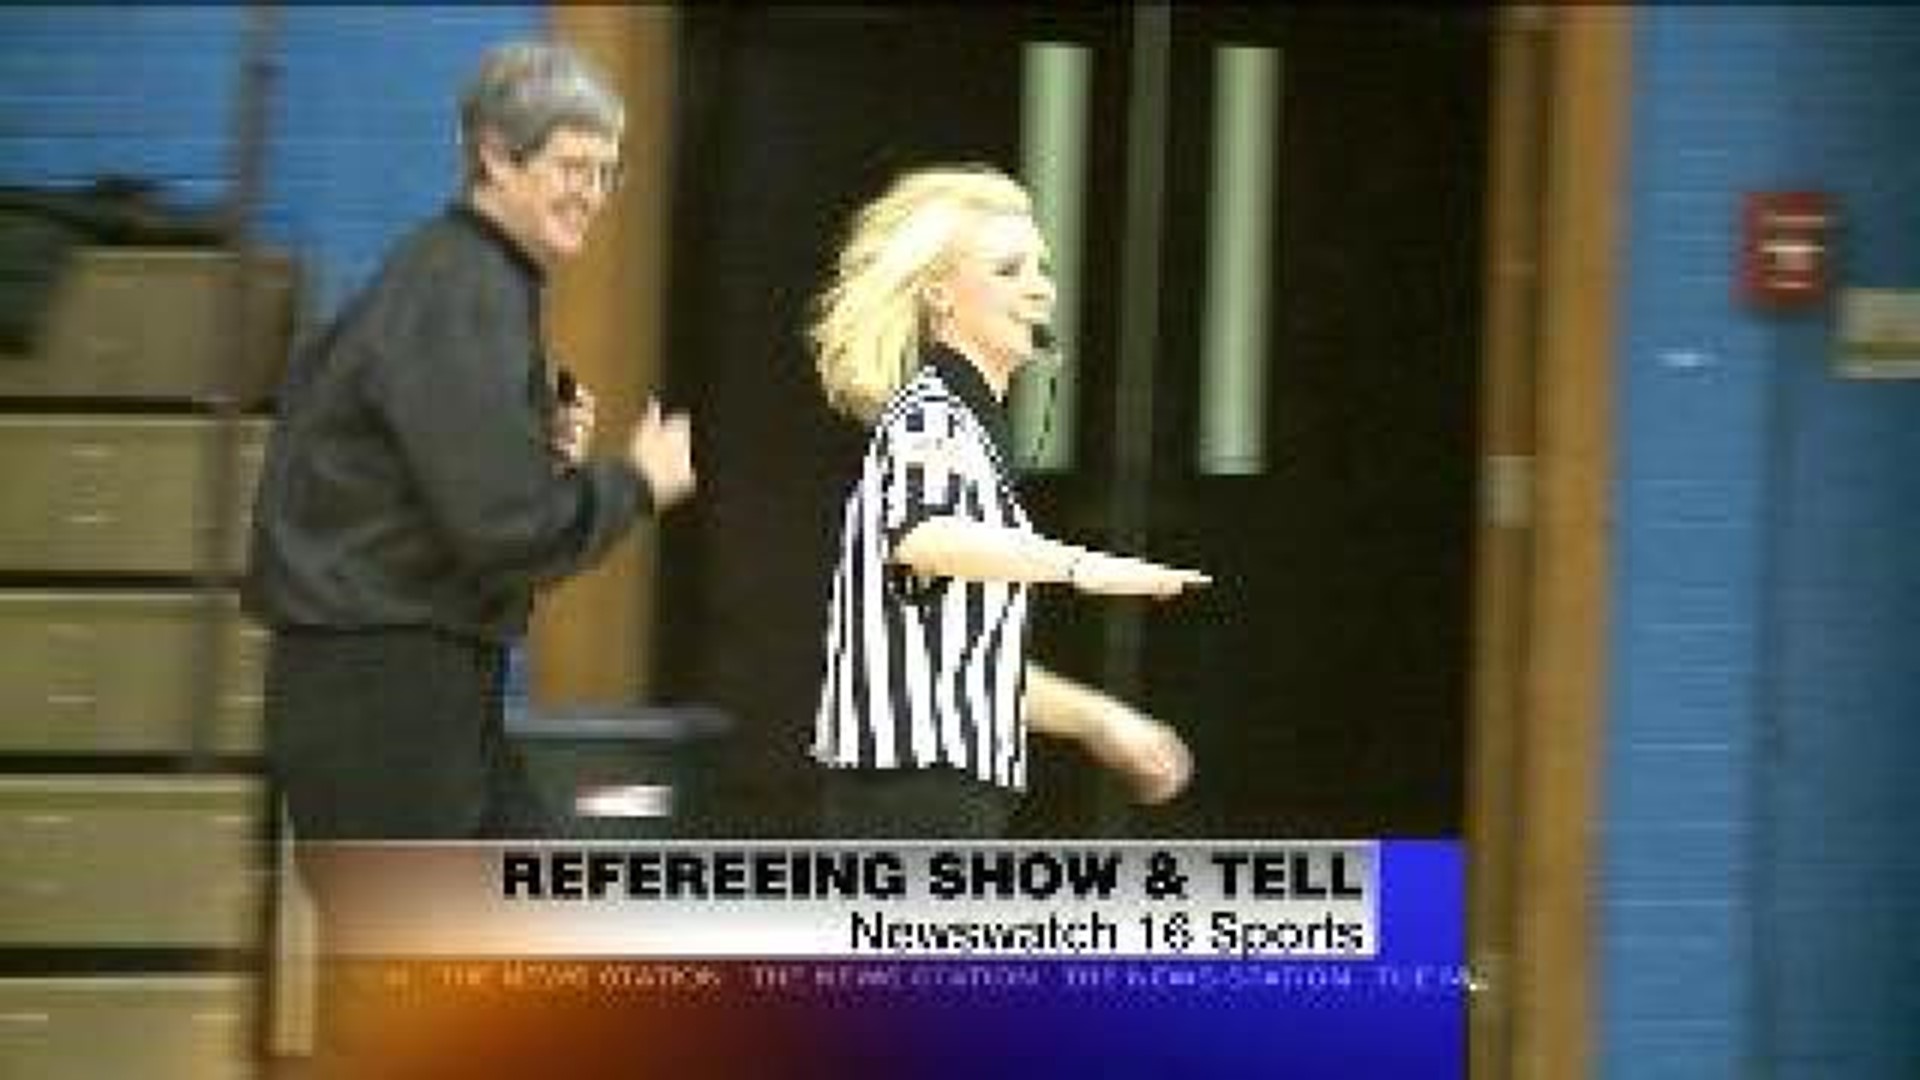 REFEREEING SHOW AND TELL